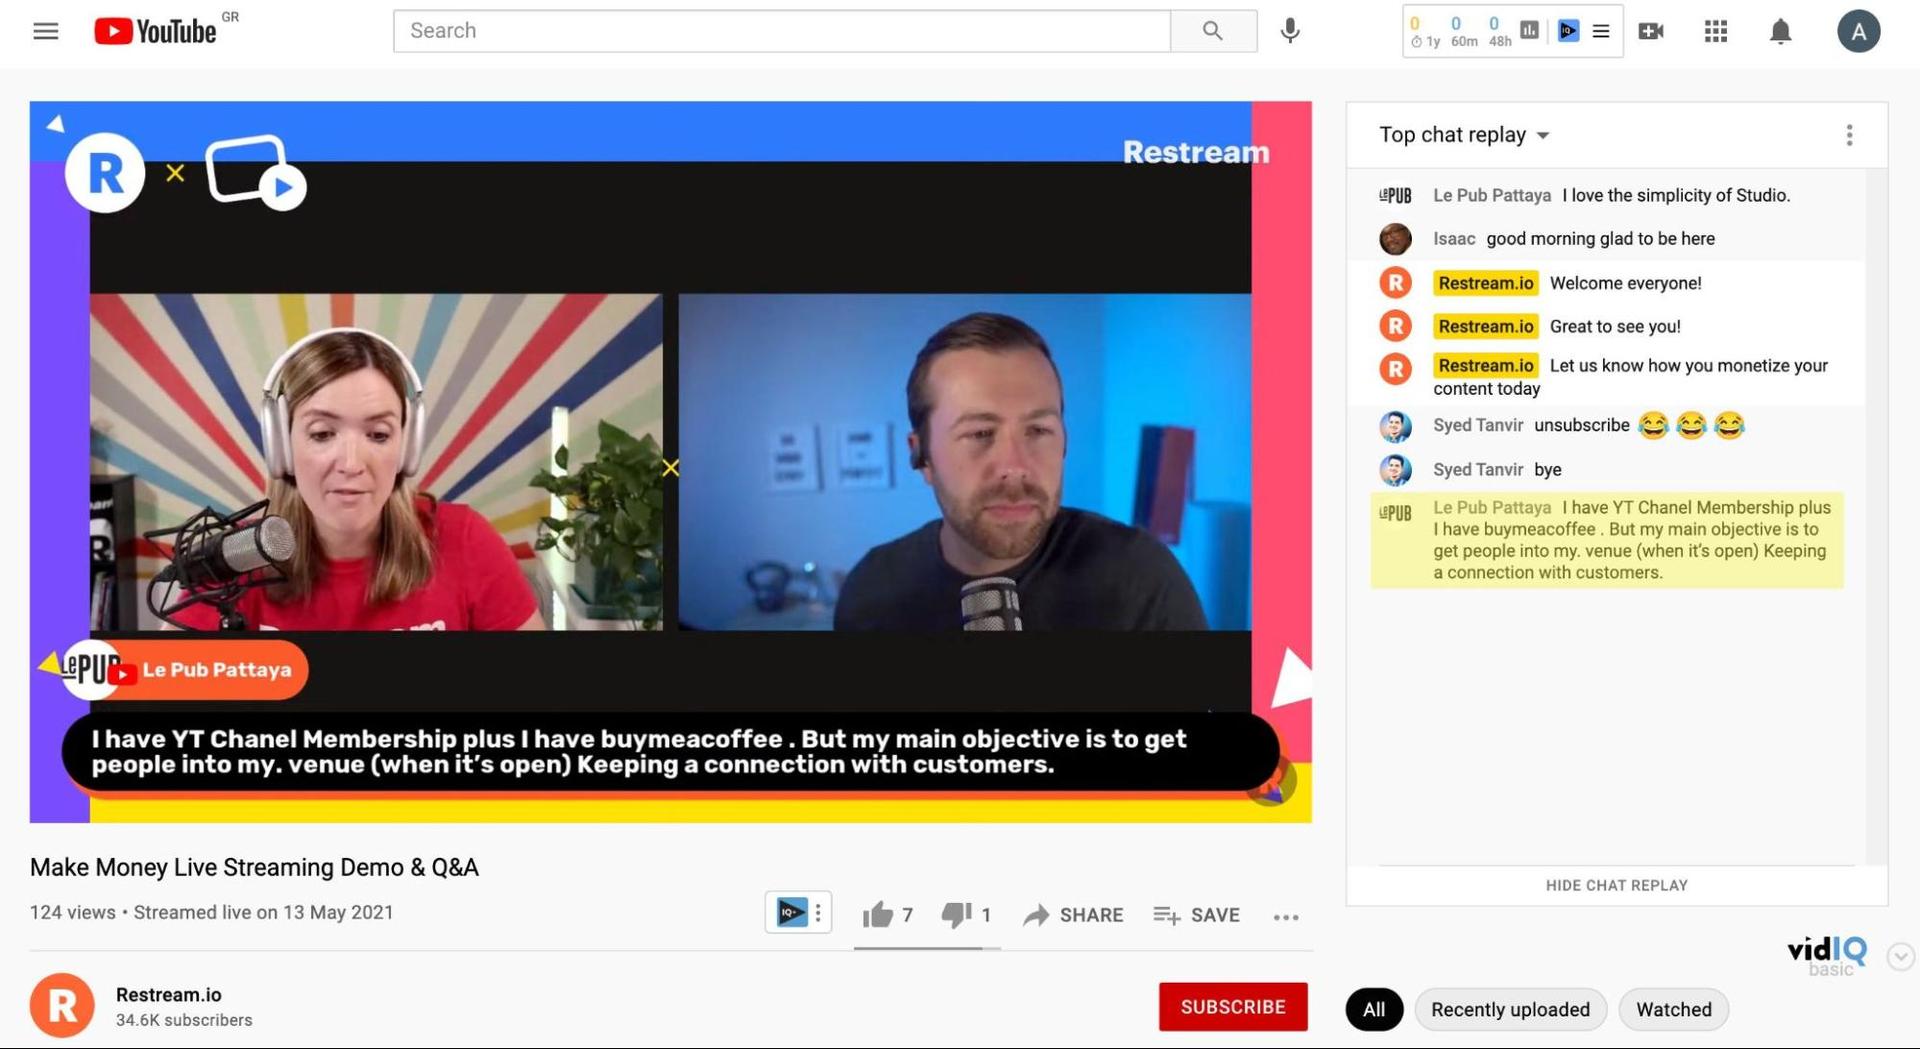 Screenshot of Uscreen and Restream hosting an event on YouTube Live with a real-time chat conversation